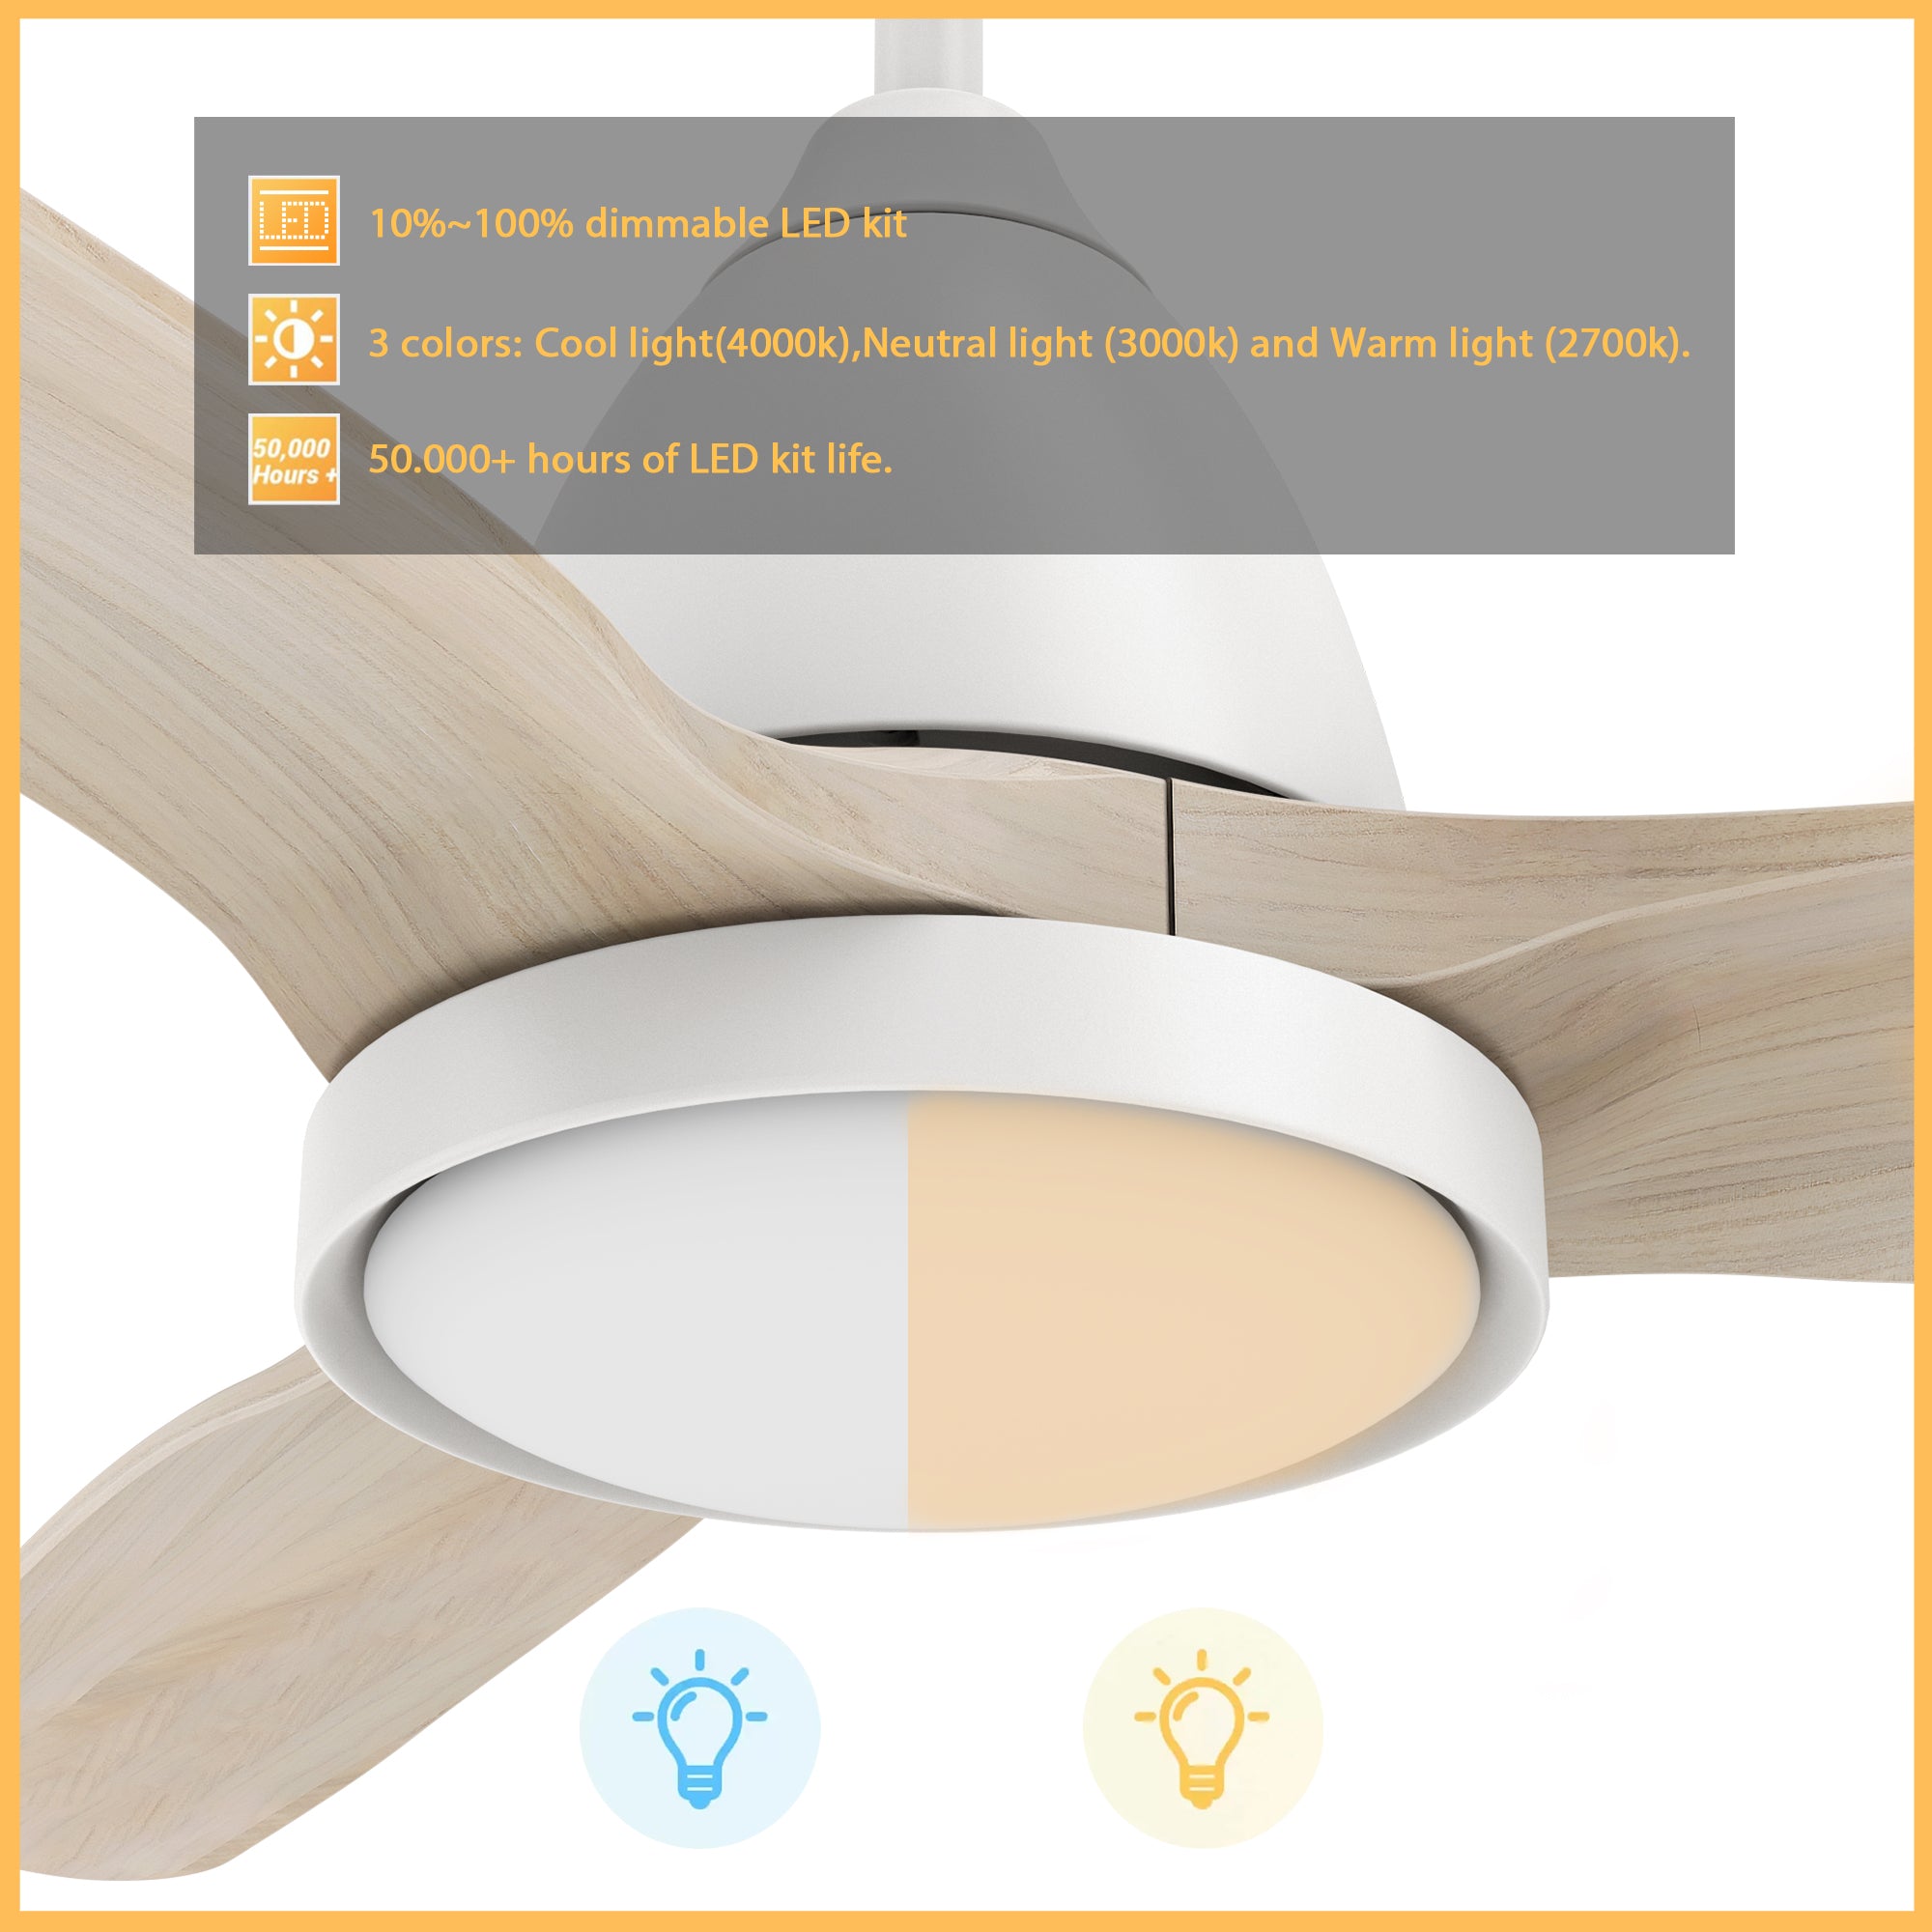 This Koa 52'' smart ceiling fan keeps your space cool, bright, and stylish. It is a soft modern masterpiece perfect for your large indoor living spaces. The fan features Remote control, Wi-Fi apps, Siri Shortcut and Voice control technology (compatible with Amazon Alexa and Google Home Assistant ) to set fan preferences. #color_Light-Wood